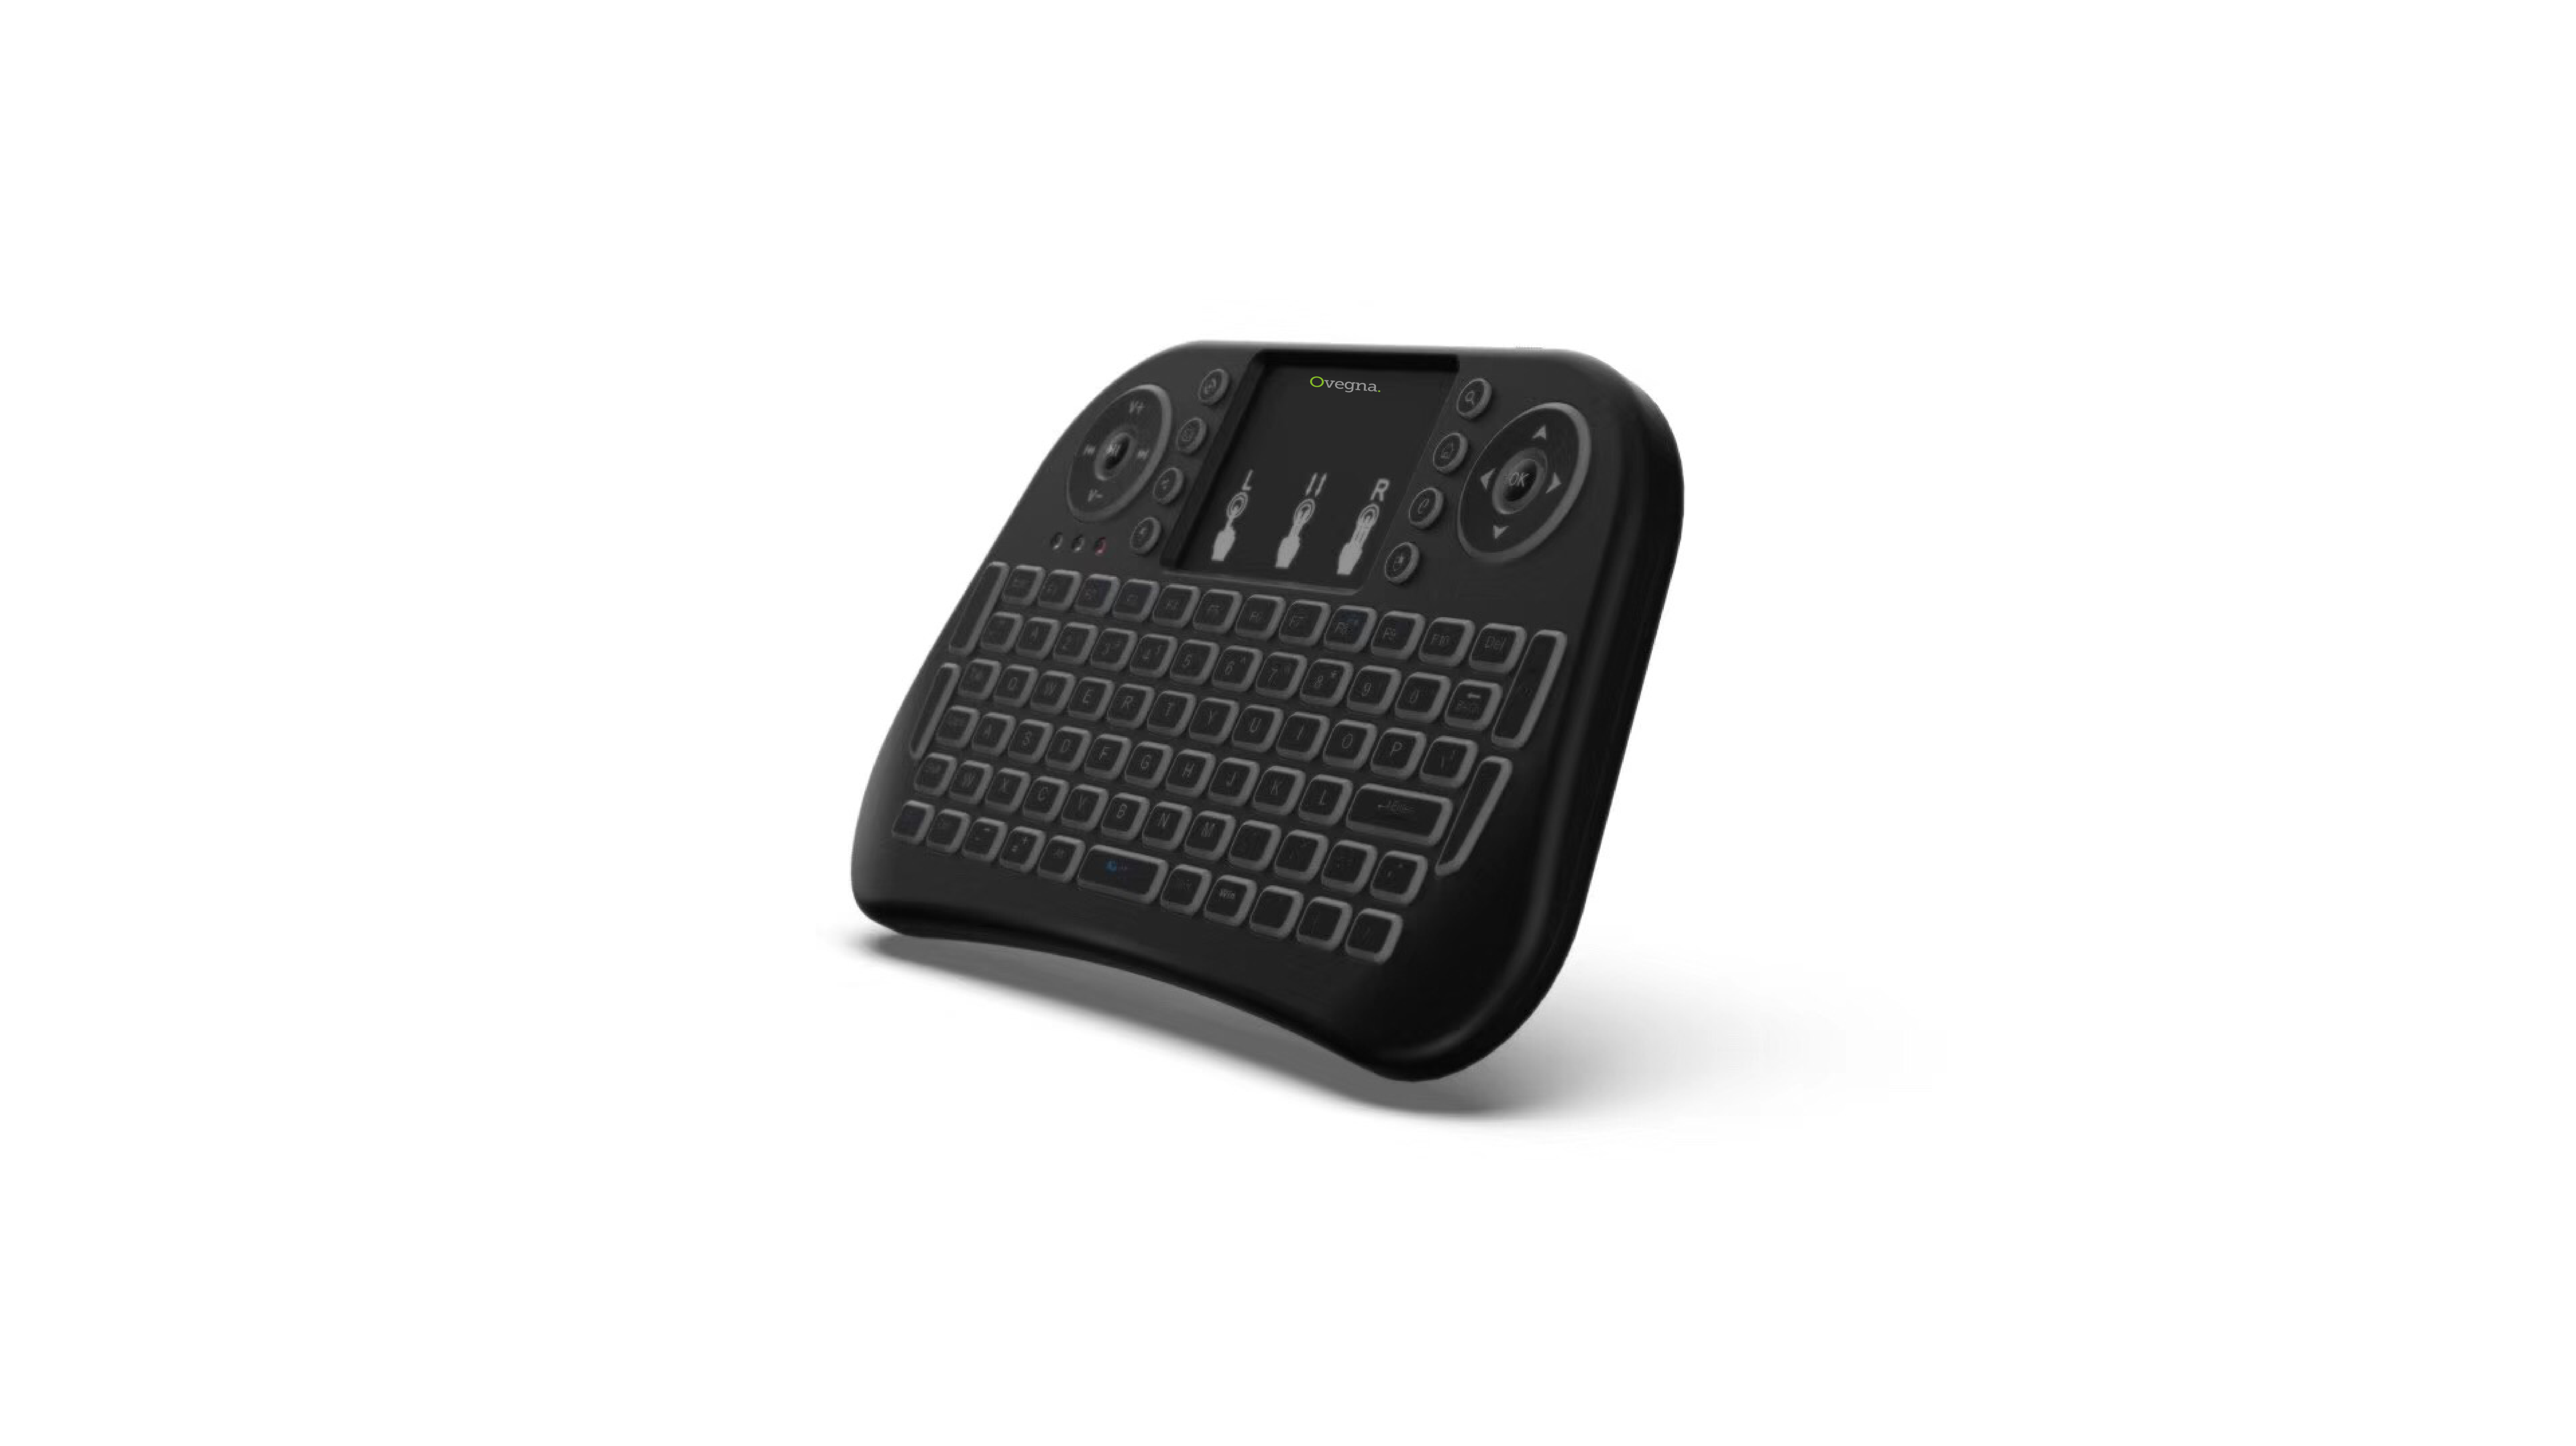 Ovegna i10: AZERTY Wireless Mini Keyboard, Wireless 2.4Ghz, Touchpad, Rechargeable Battery, RGB Backlit, for Smart TV, PC, Mini PC, Mac, Raspberry PI 2/3/4, Consoles, Laptop and Android Box 